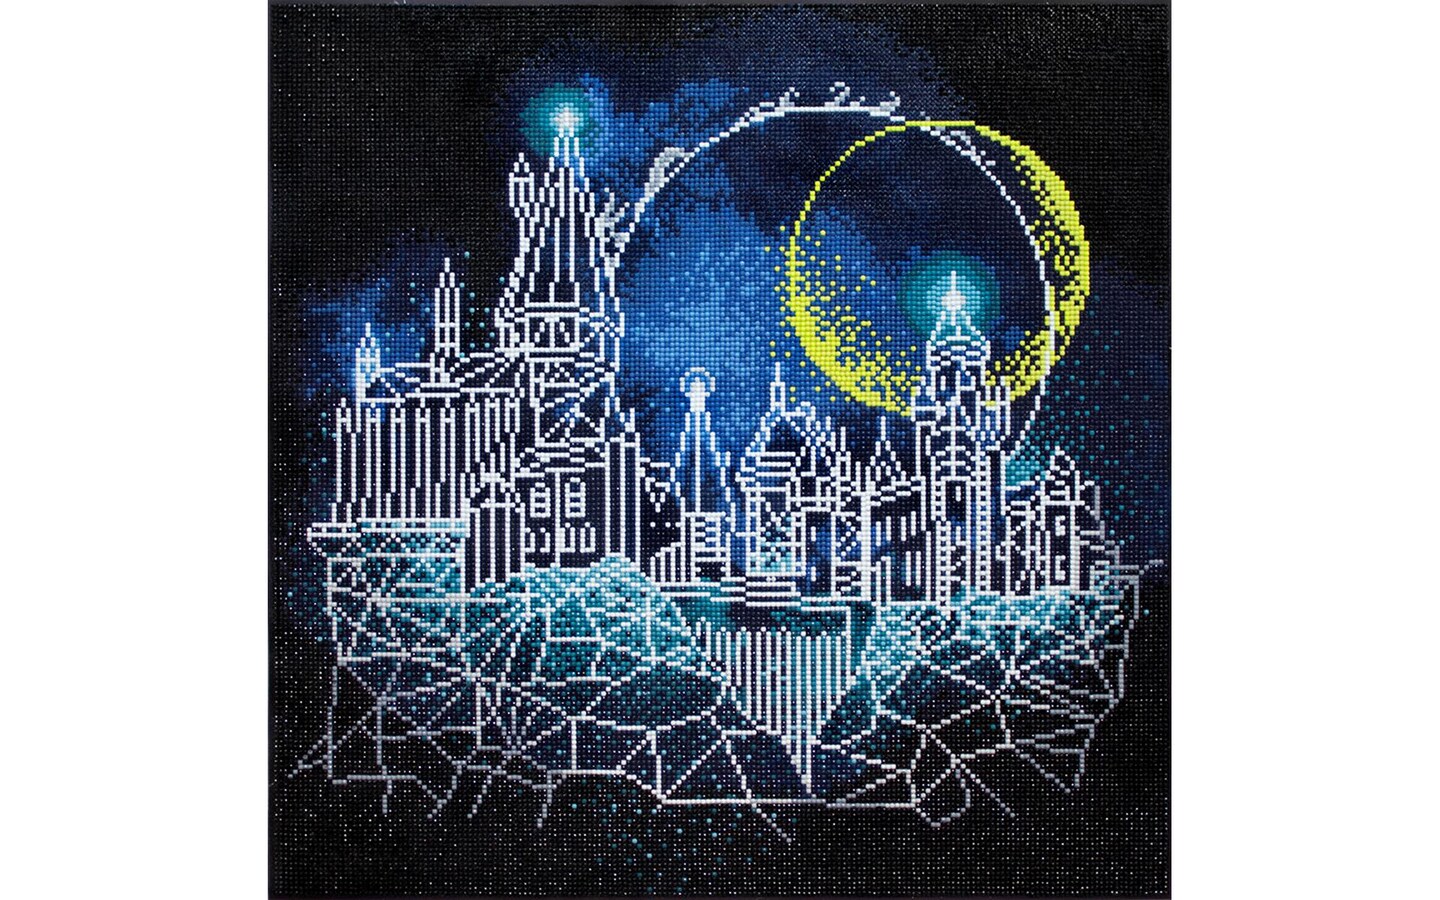 Completed 'Moon over Hogwarts' today! This has been my favorite